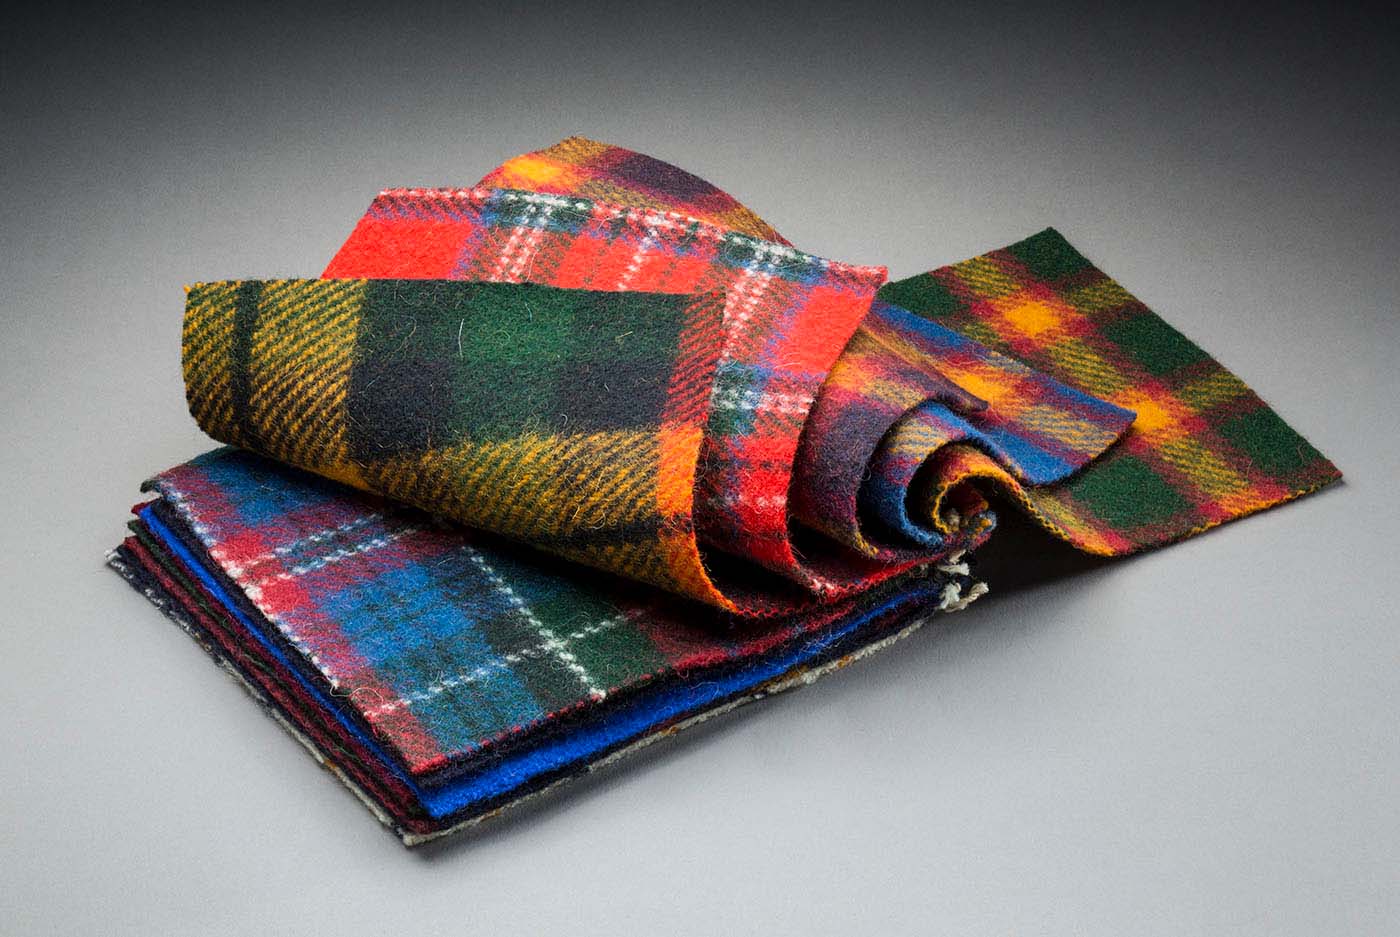 Bundle of saddlery cloth samples, stitched together into a sample book, before 1972 - click to view larger image